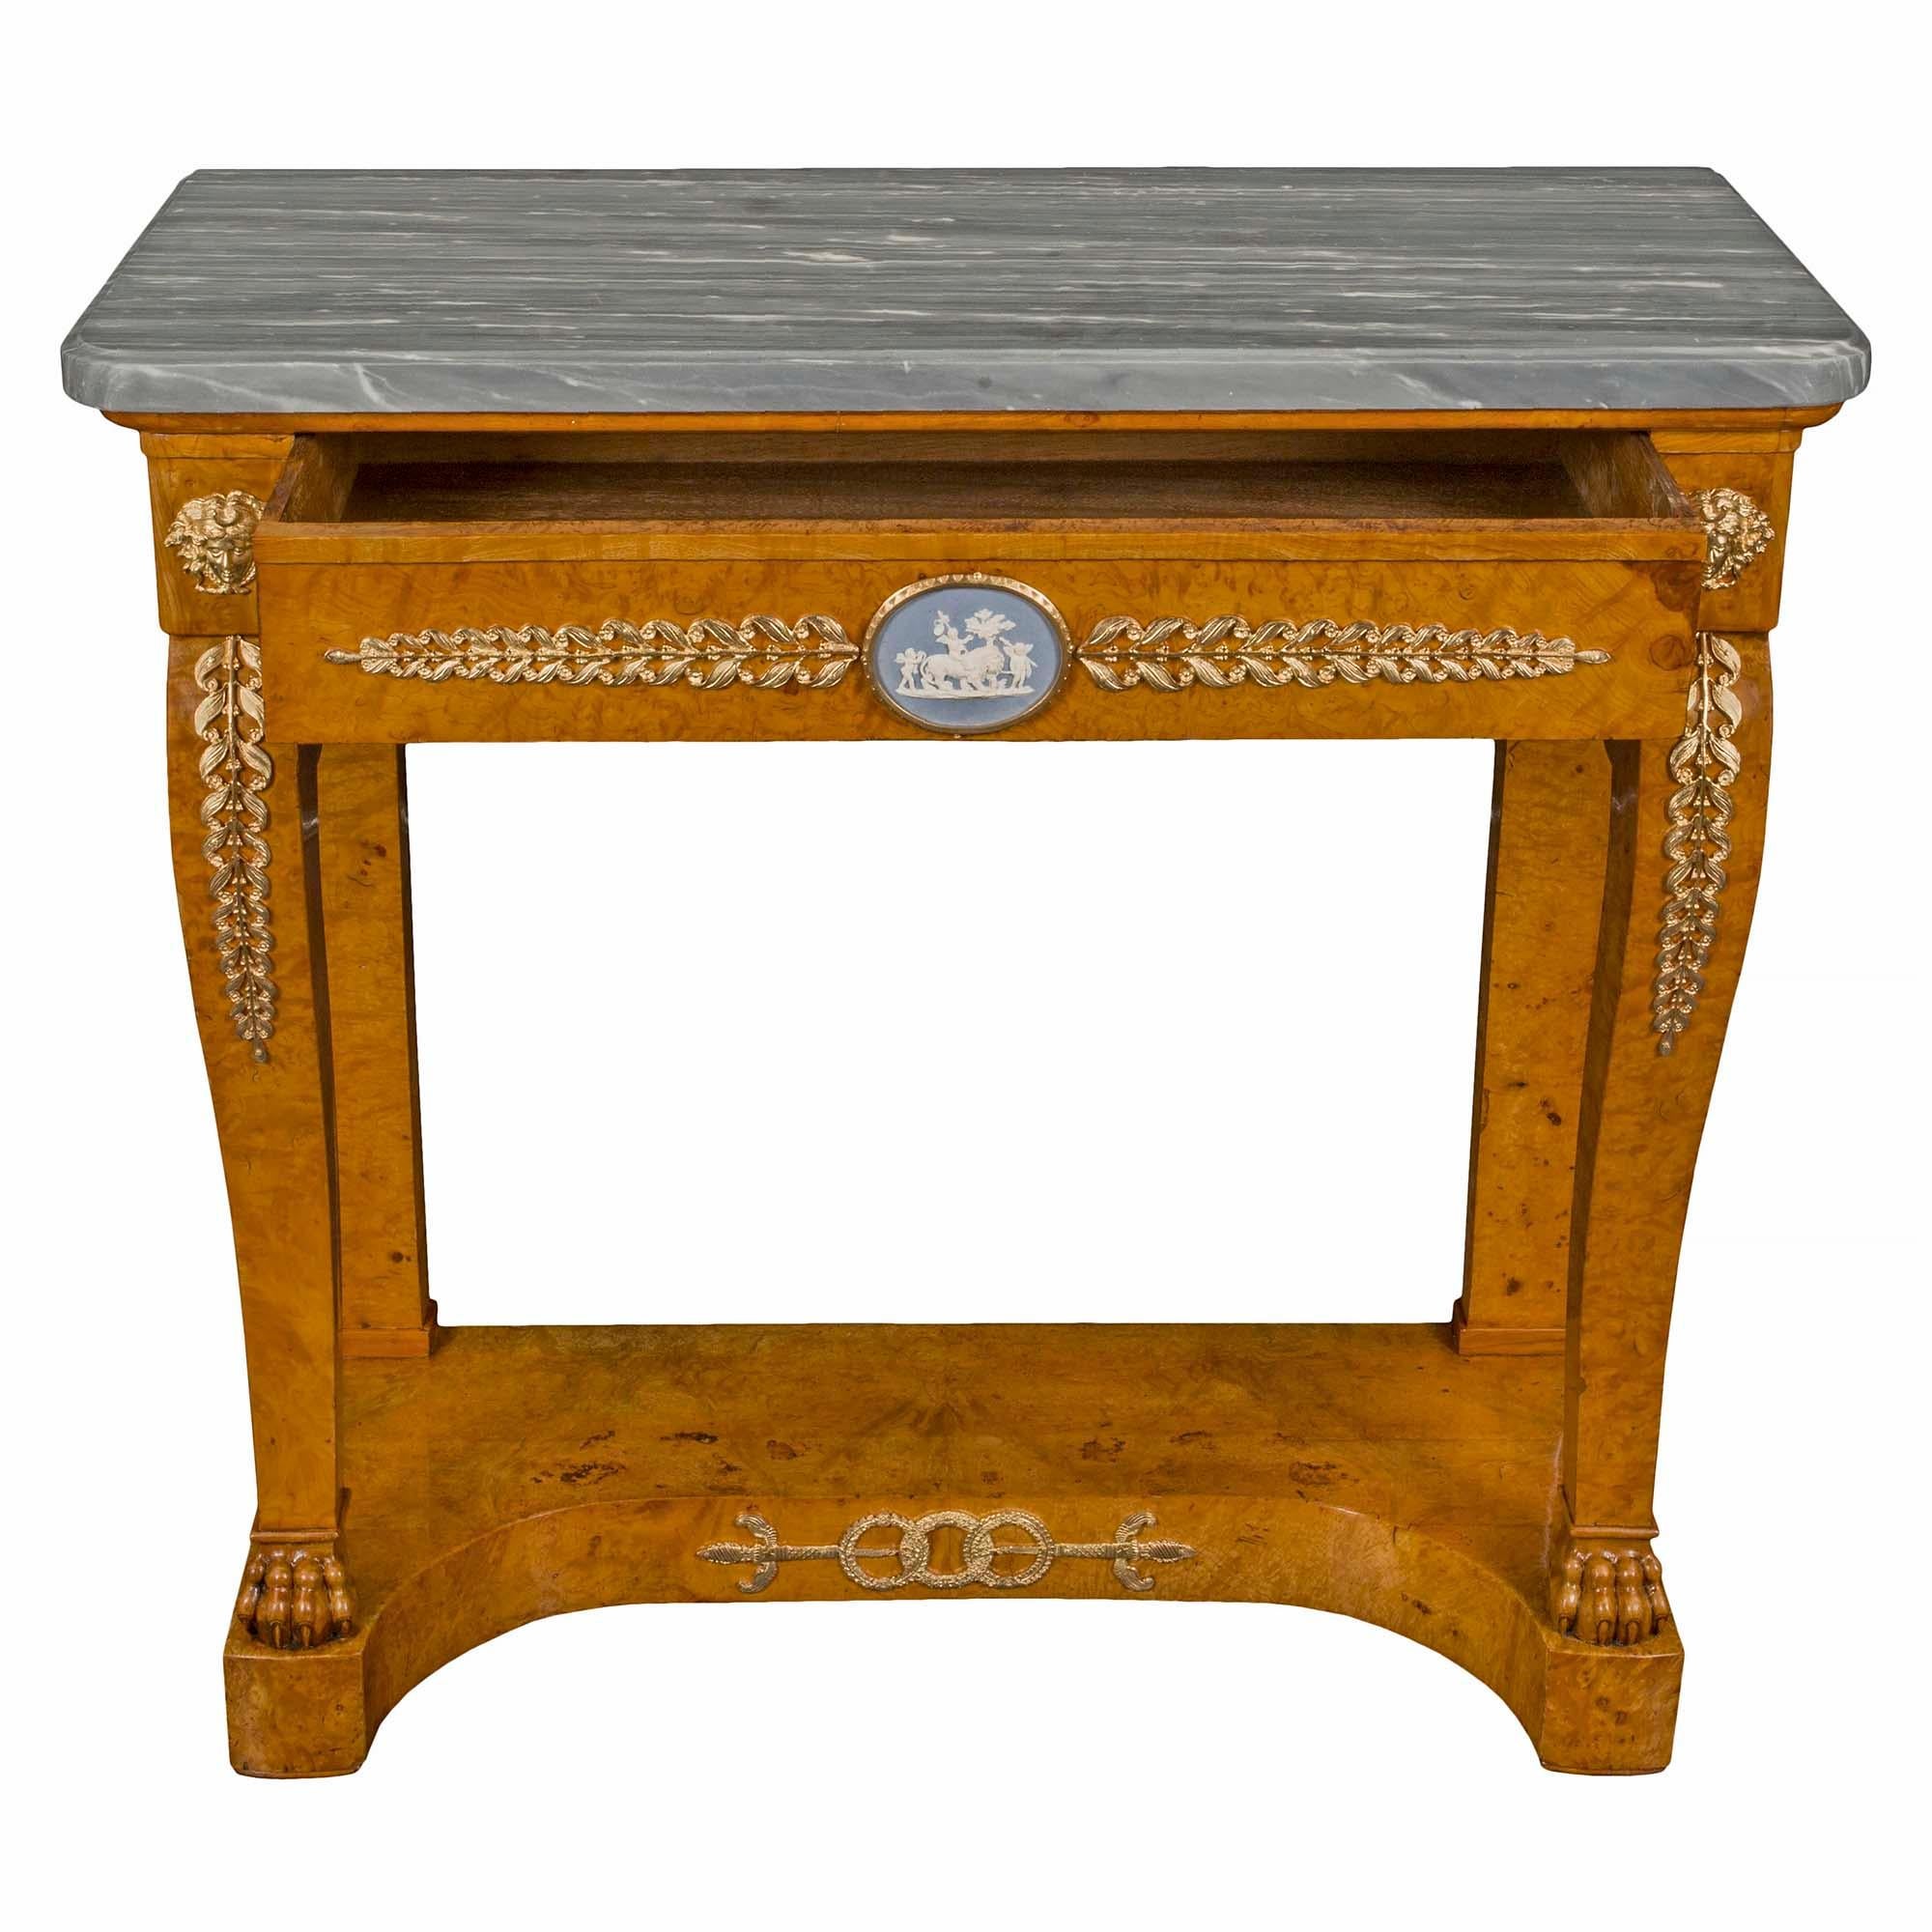 French Early 19th Century Neoclassical Style Maple, Marble and Wedgwood Console For Sale 1